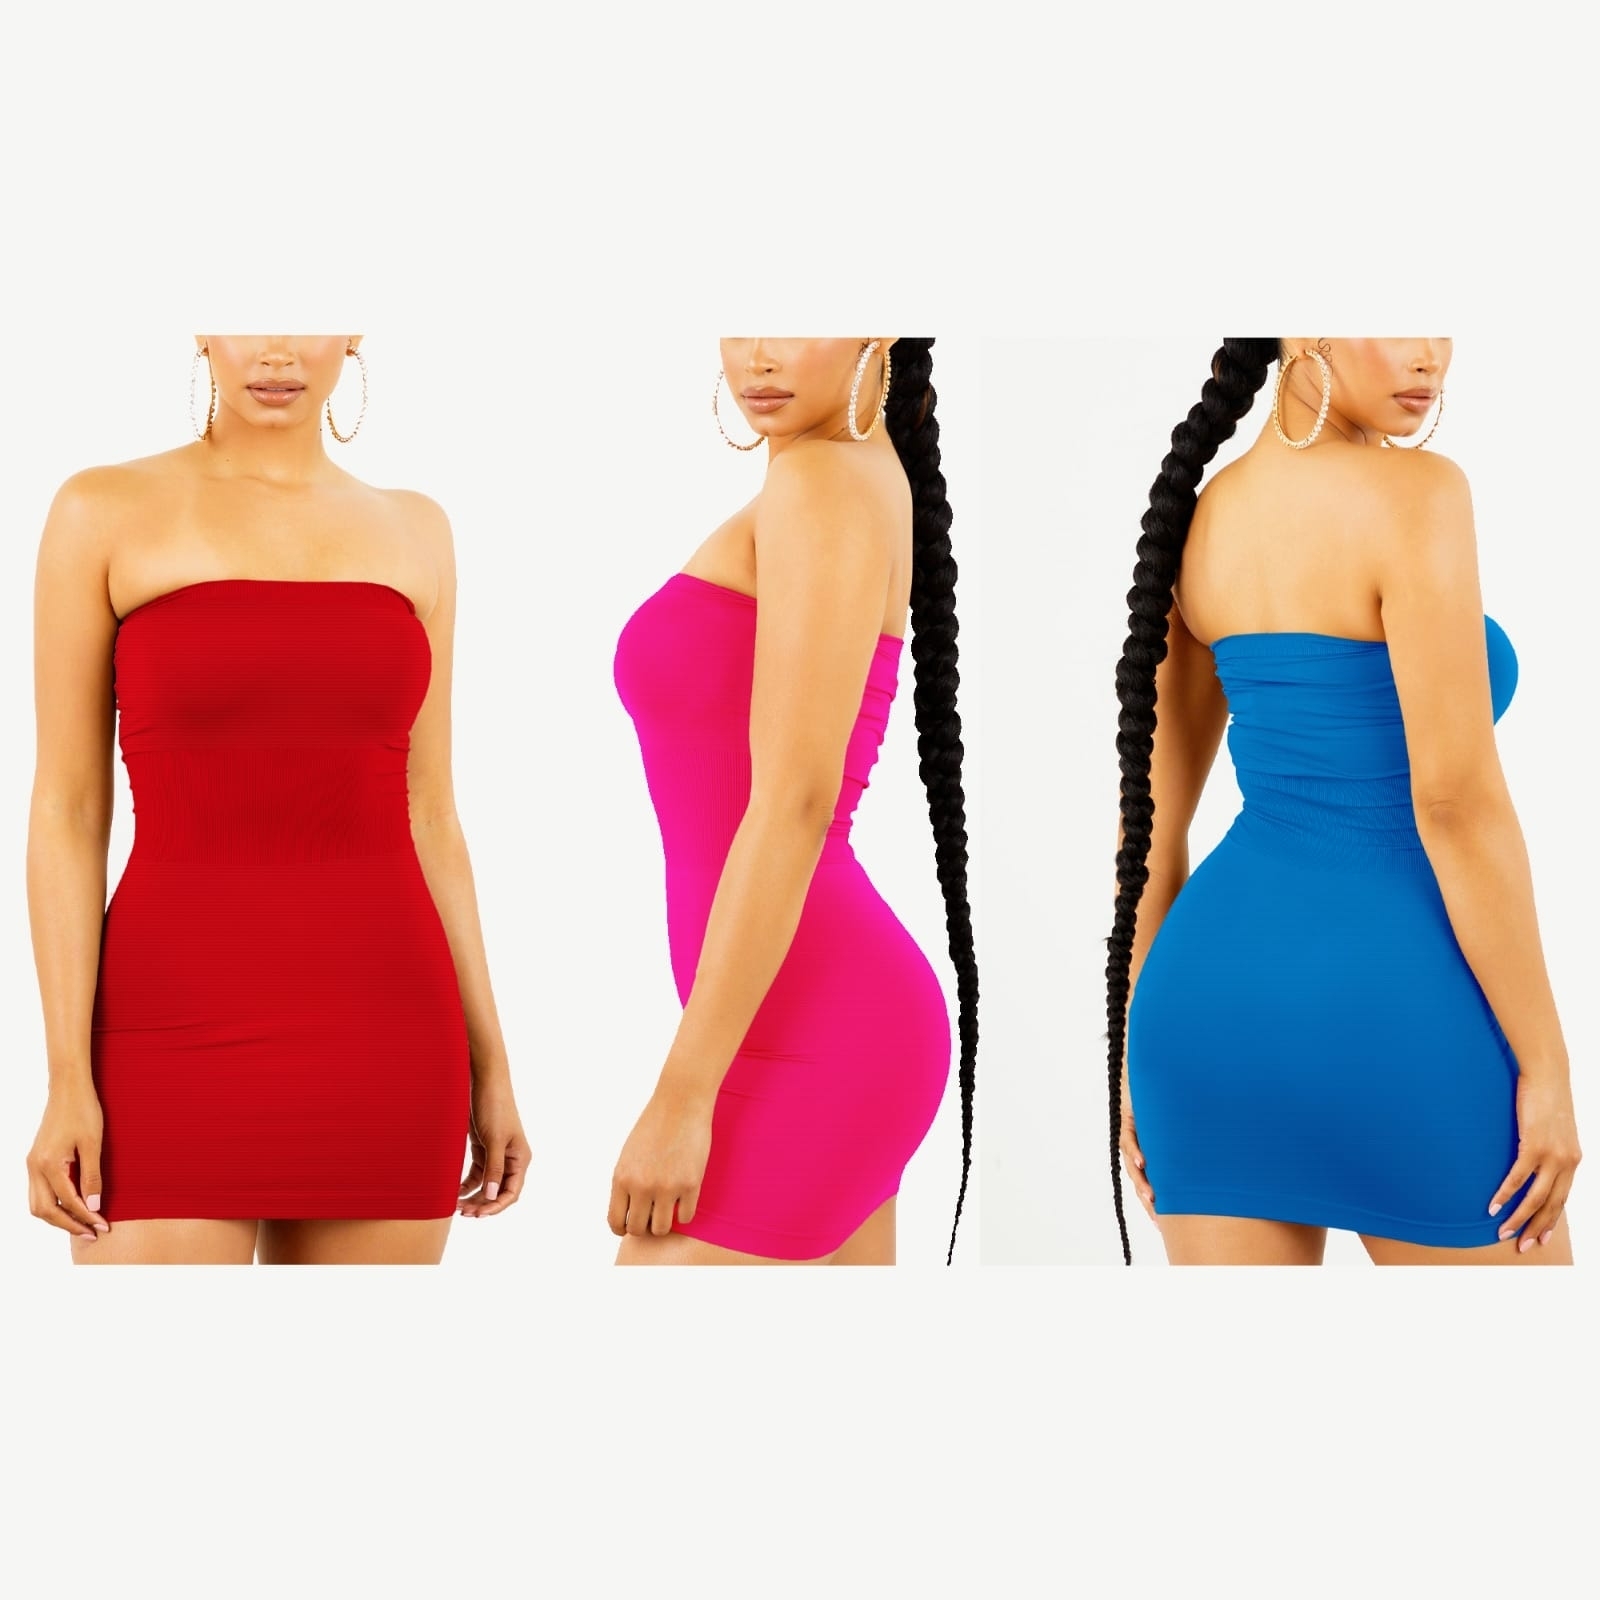 3-Pack Women's Strapless Stretchy Seamless Tight Fit Body Con Mini Tube Top Dress - BLUE, 2XL